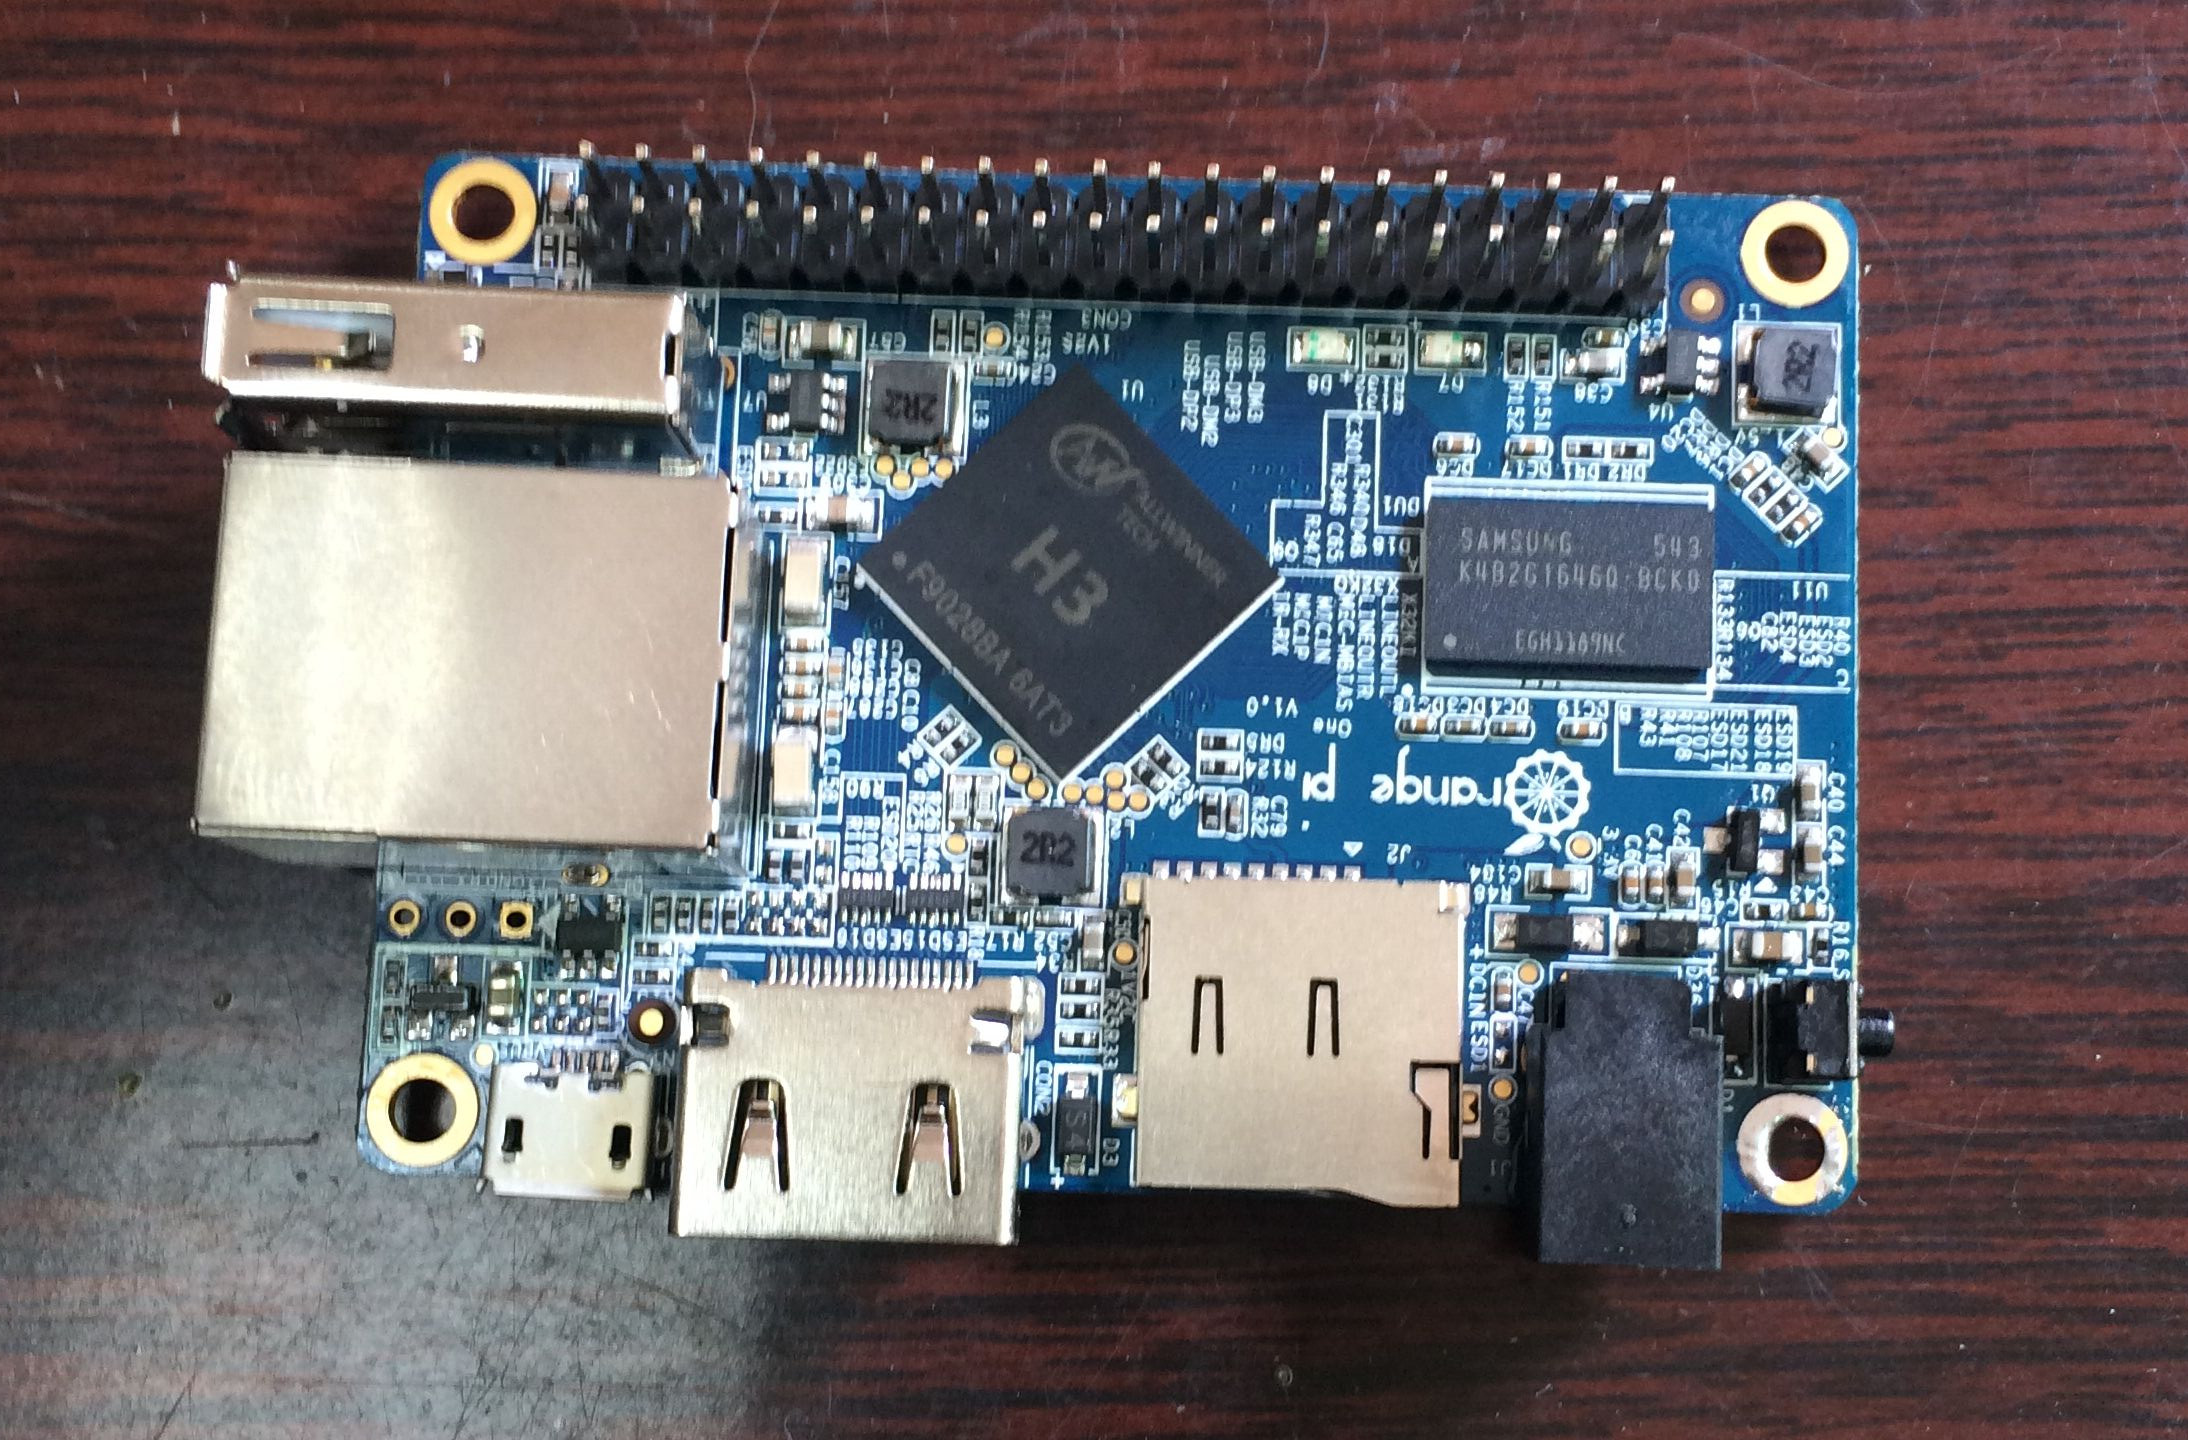  Orange Pi One  is a 10 Quad Core Board with Ethernet and 